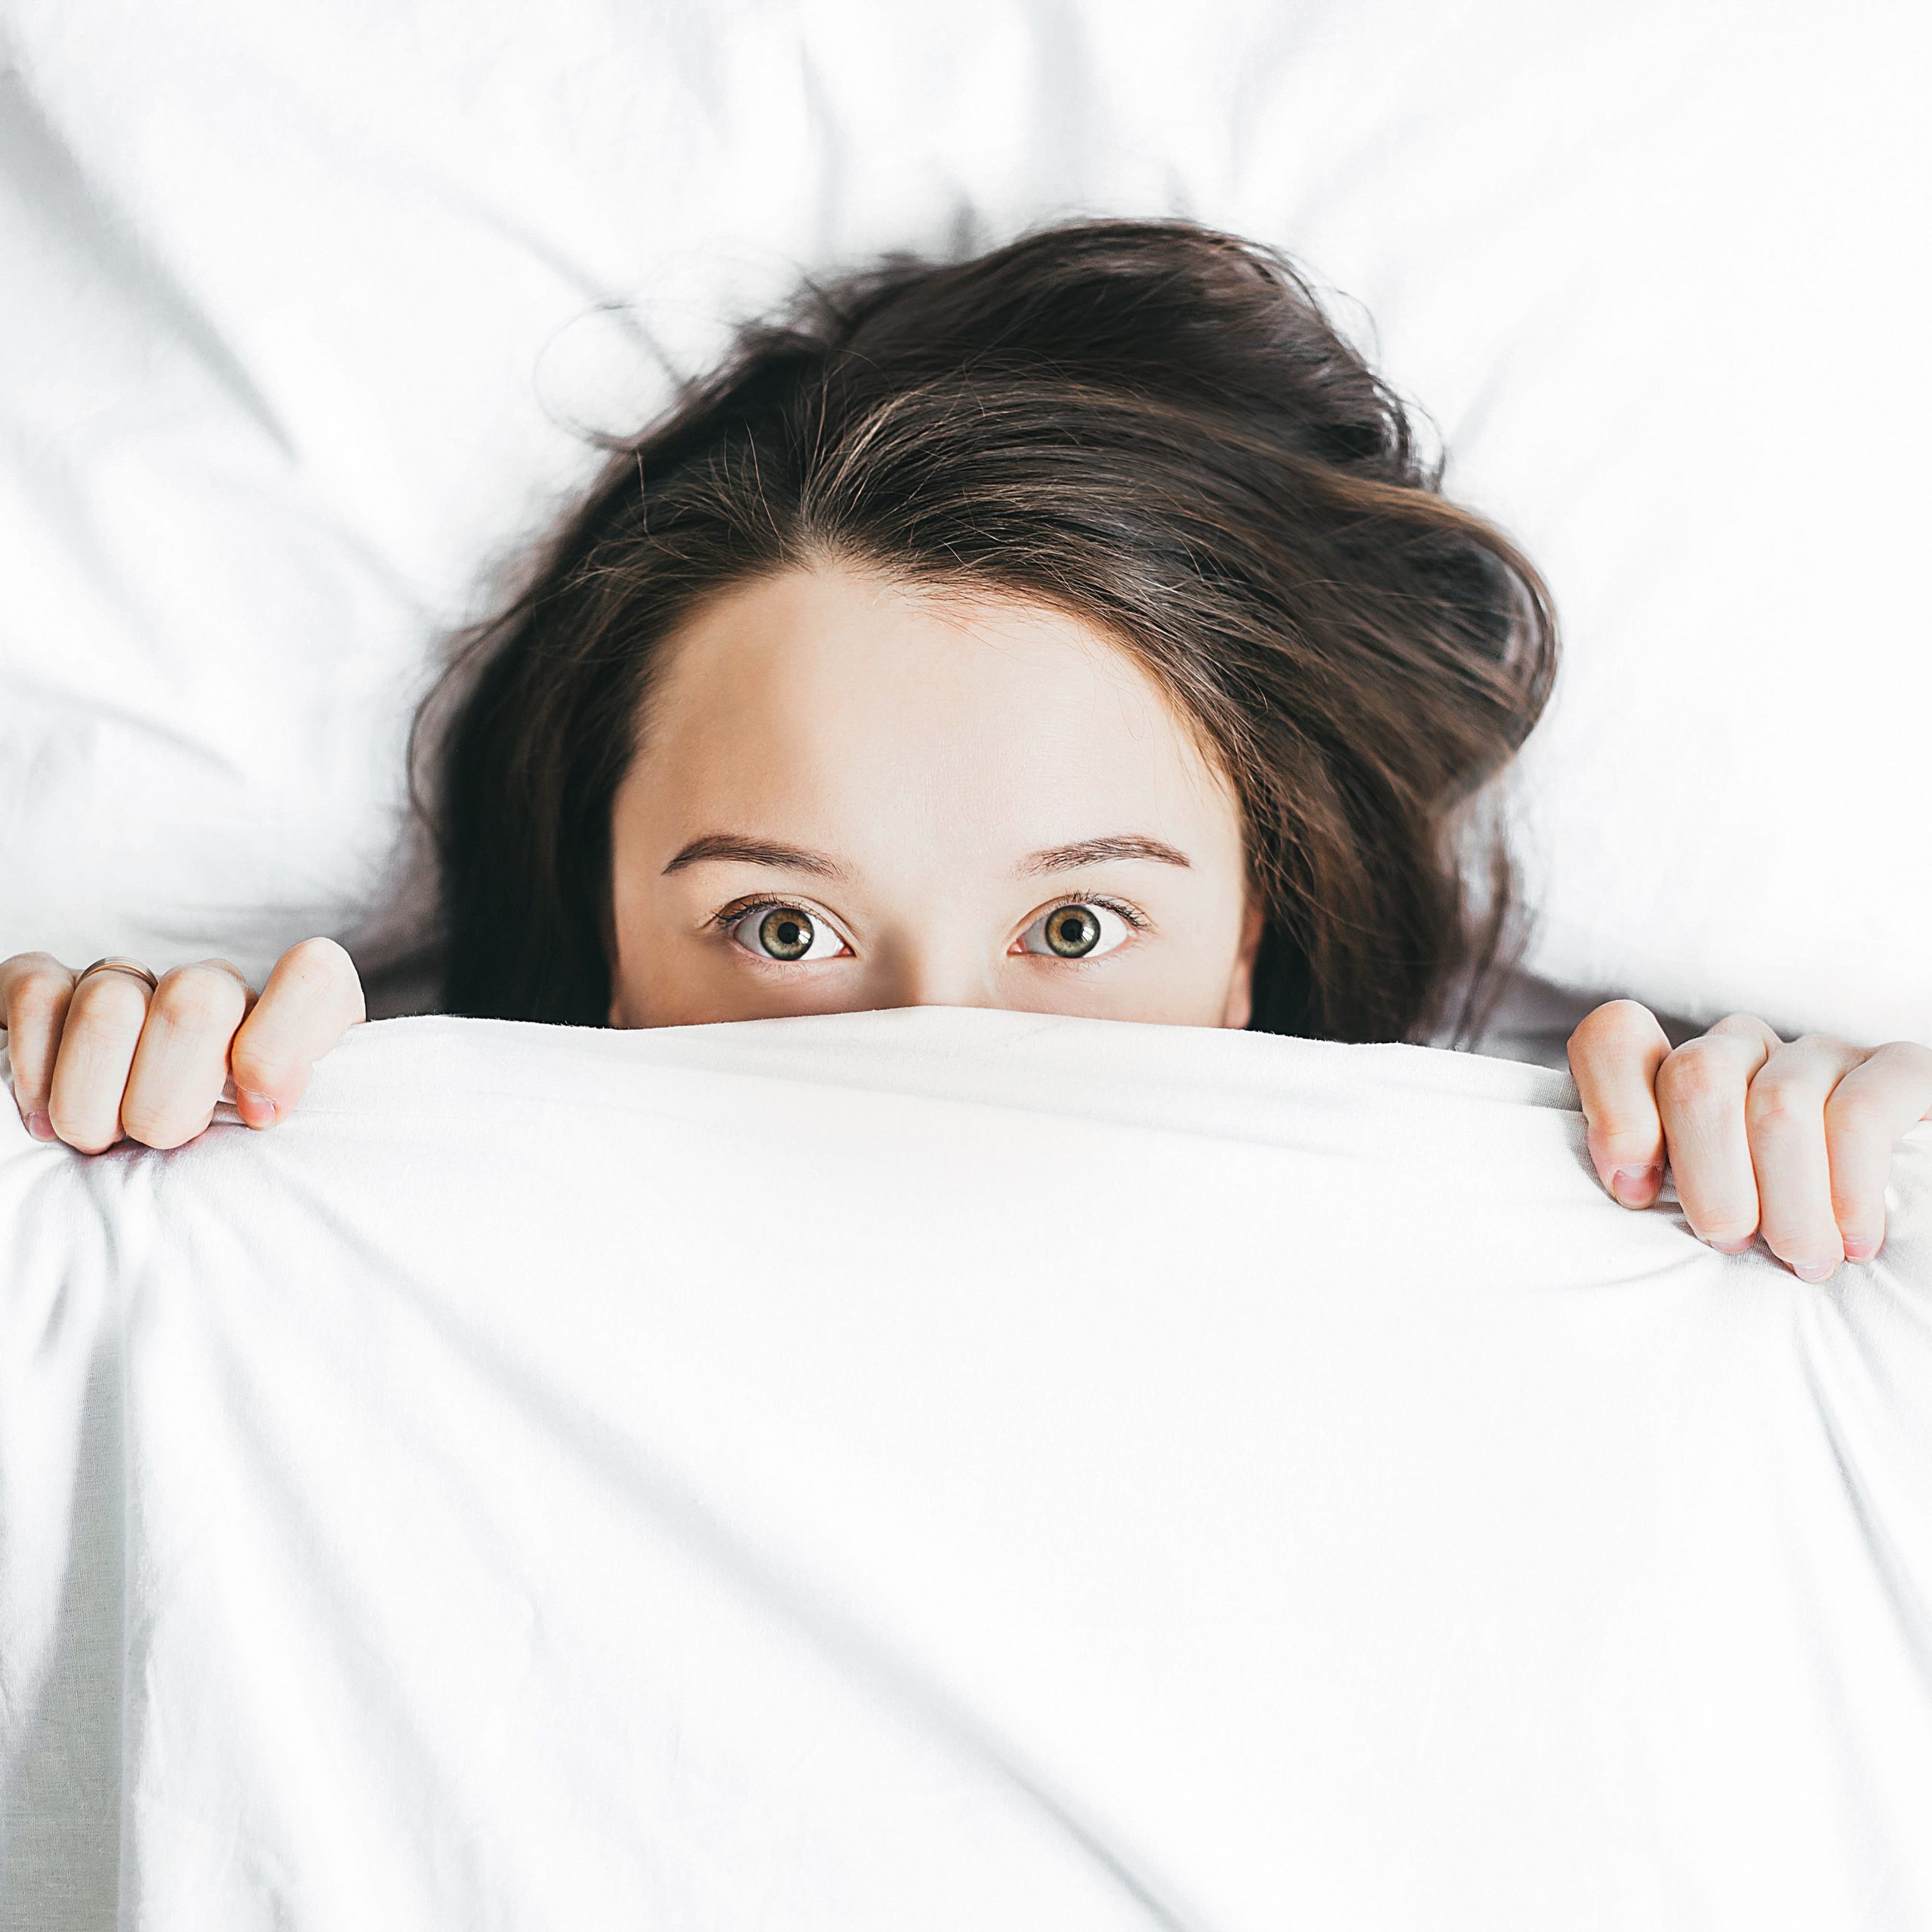 5 Simple Ways to Overcome Insomnia